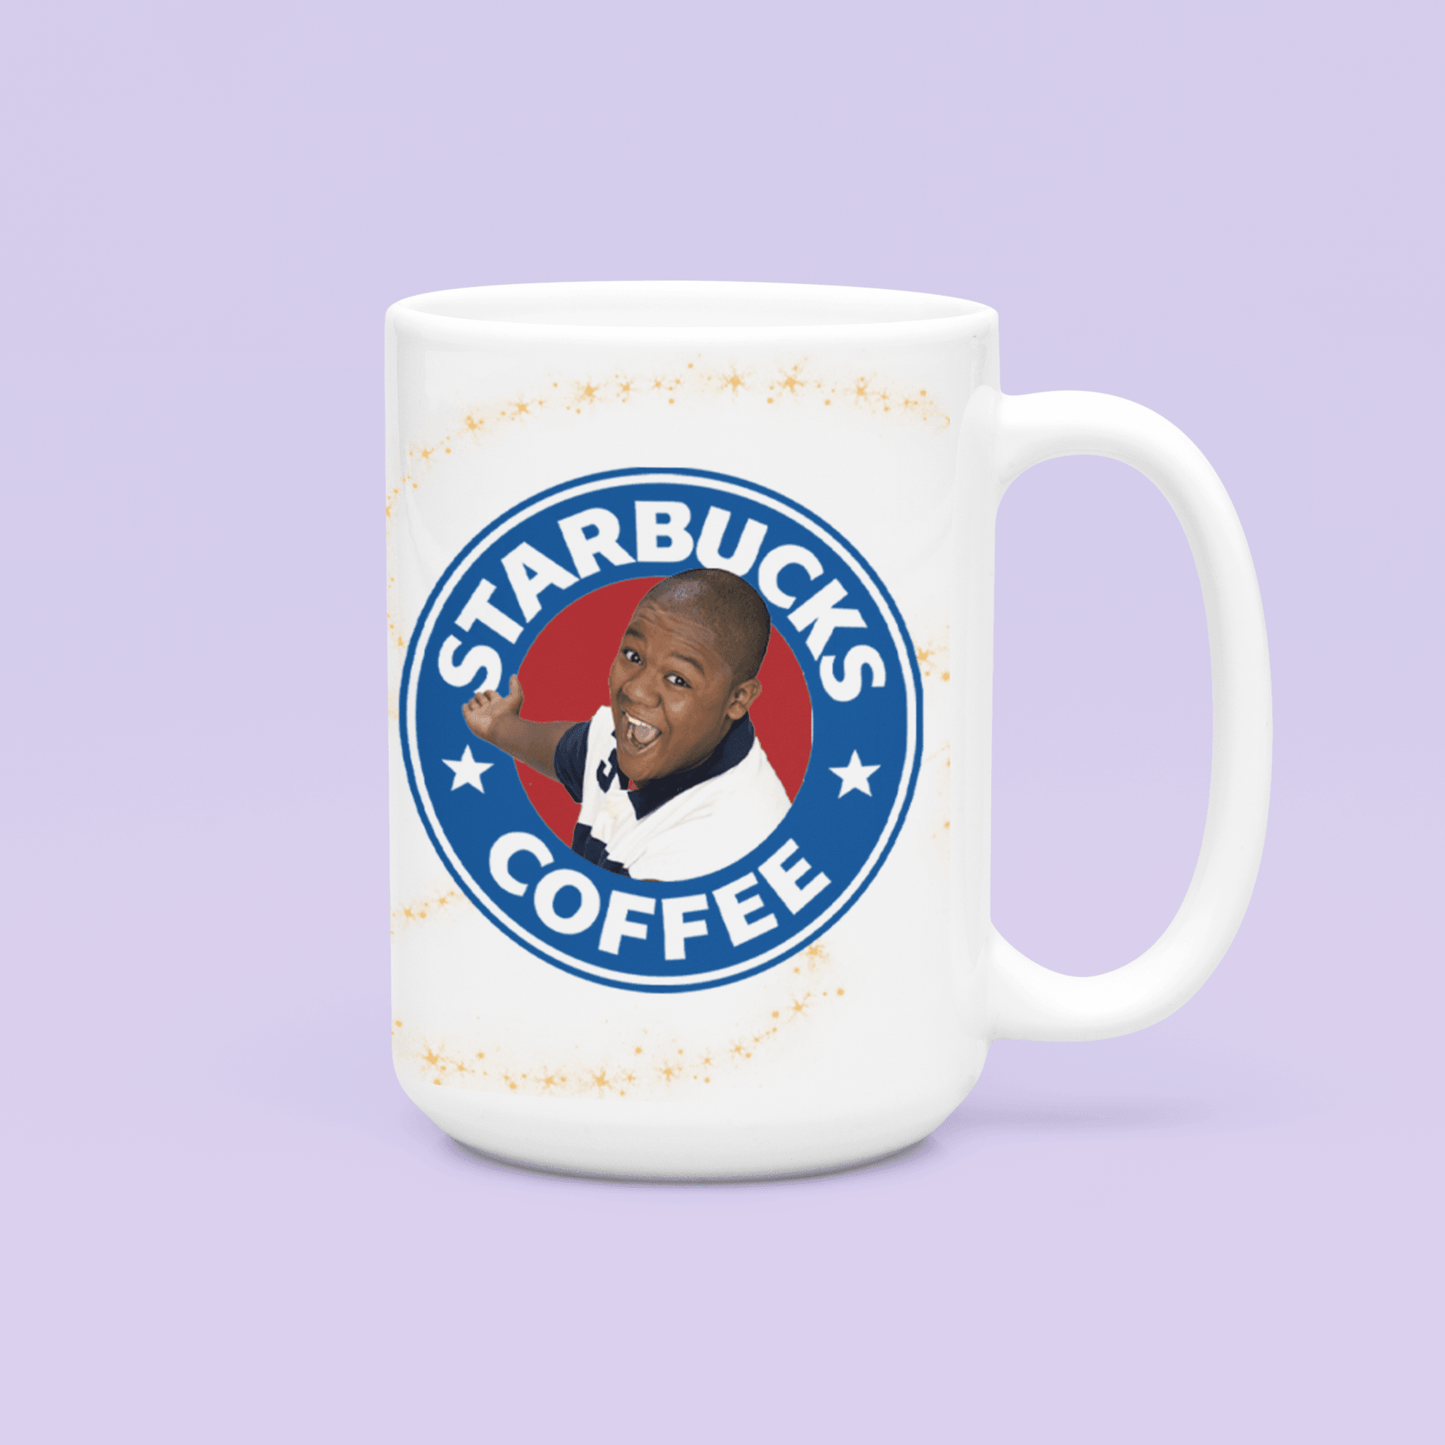 Cory in the House Starbucks Mug - Two Crafty Gays